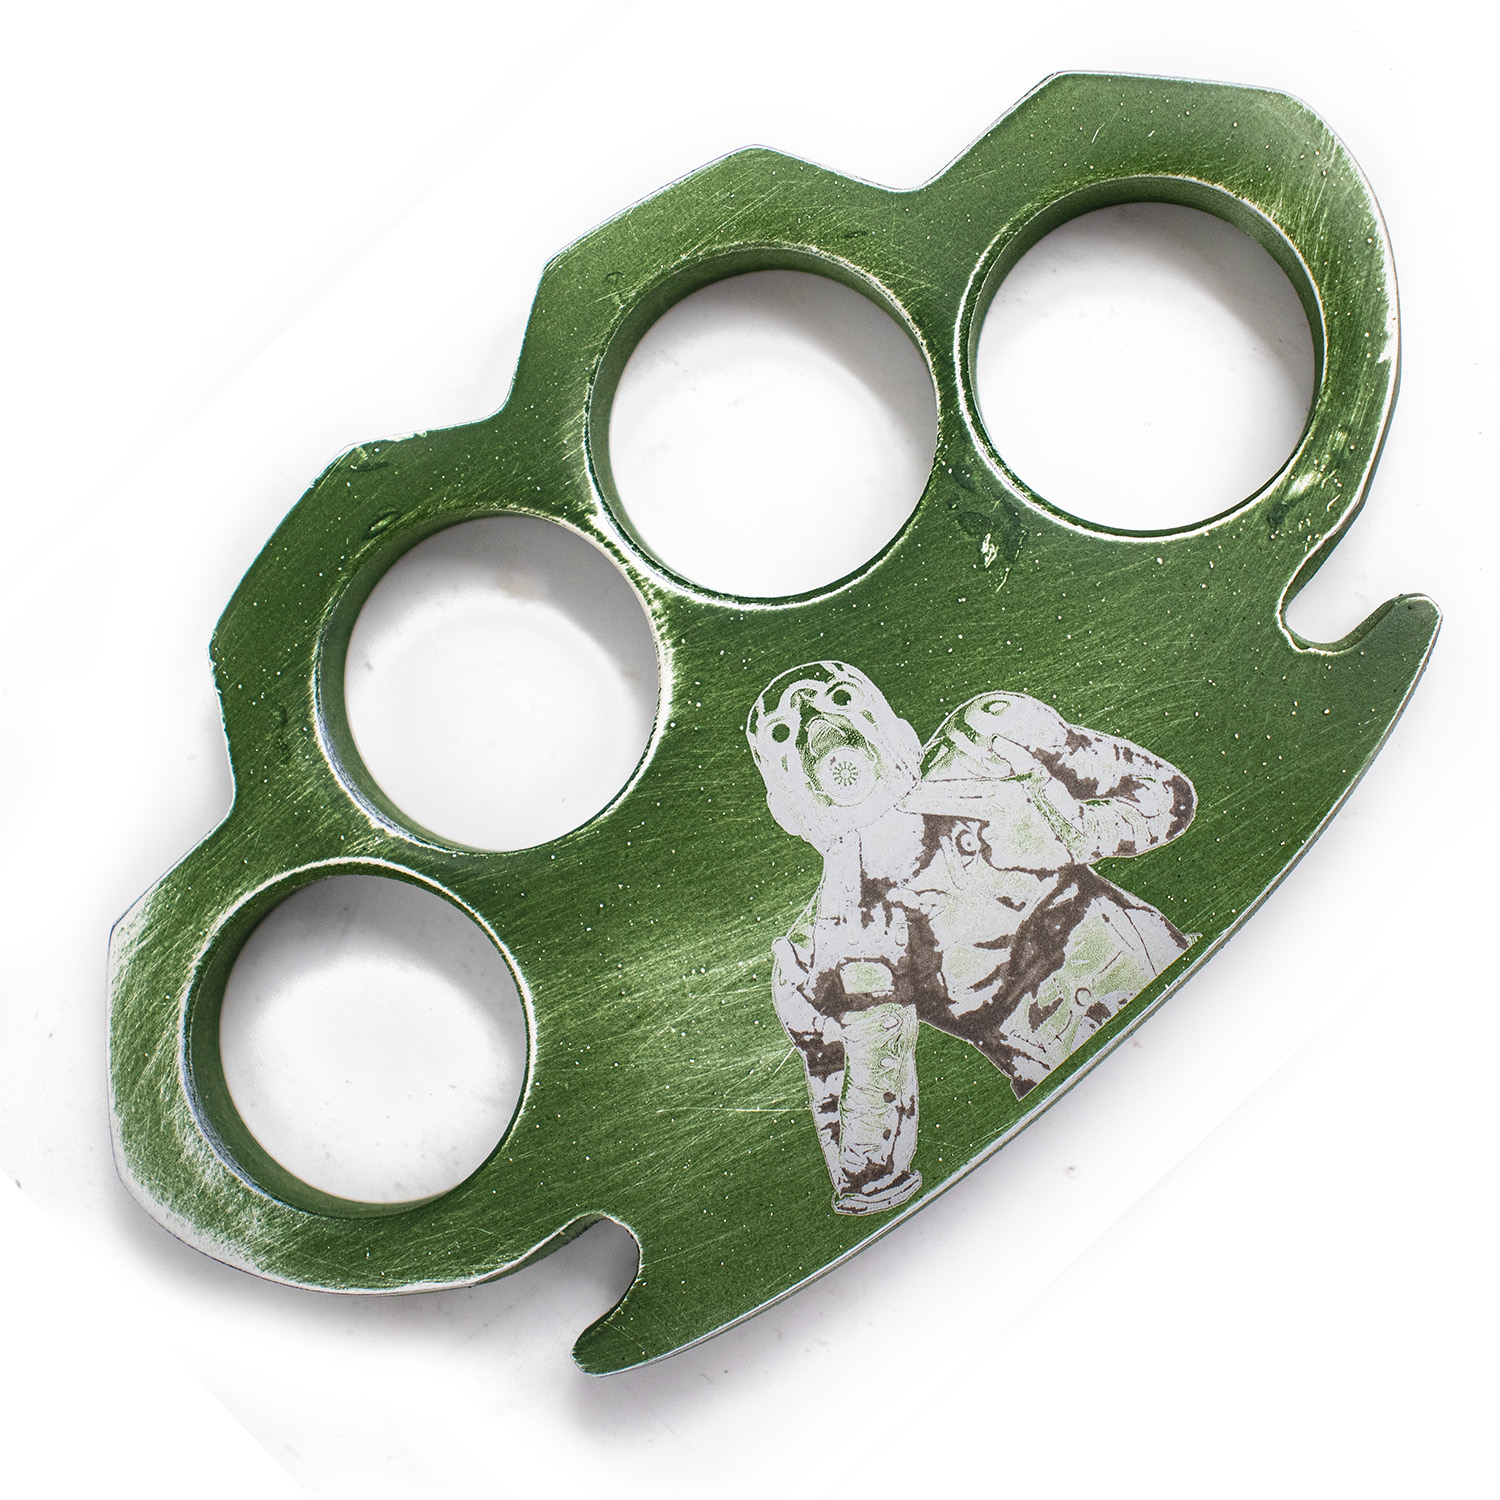 CI 300 P DGR PSY Cerakote Made in USA Brass Knuckles Distressed Green Psycho